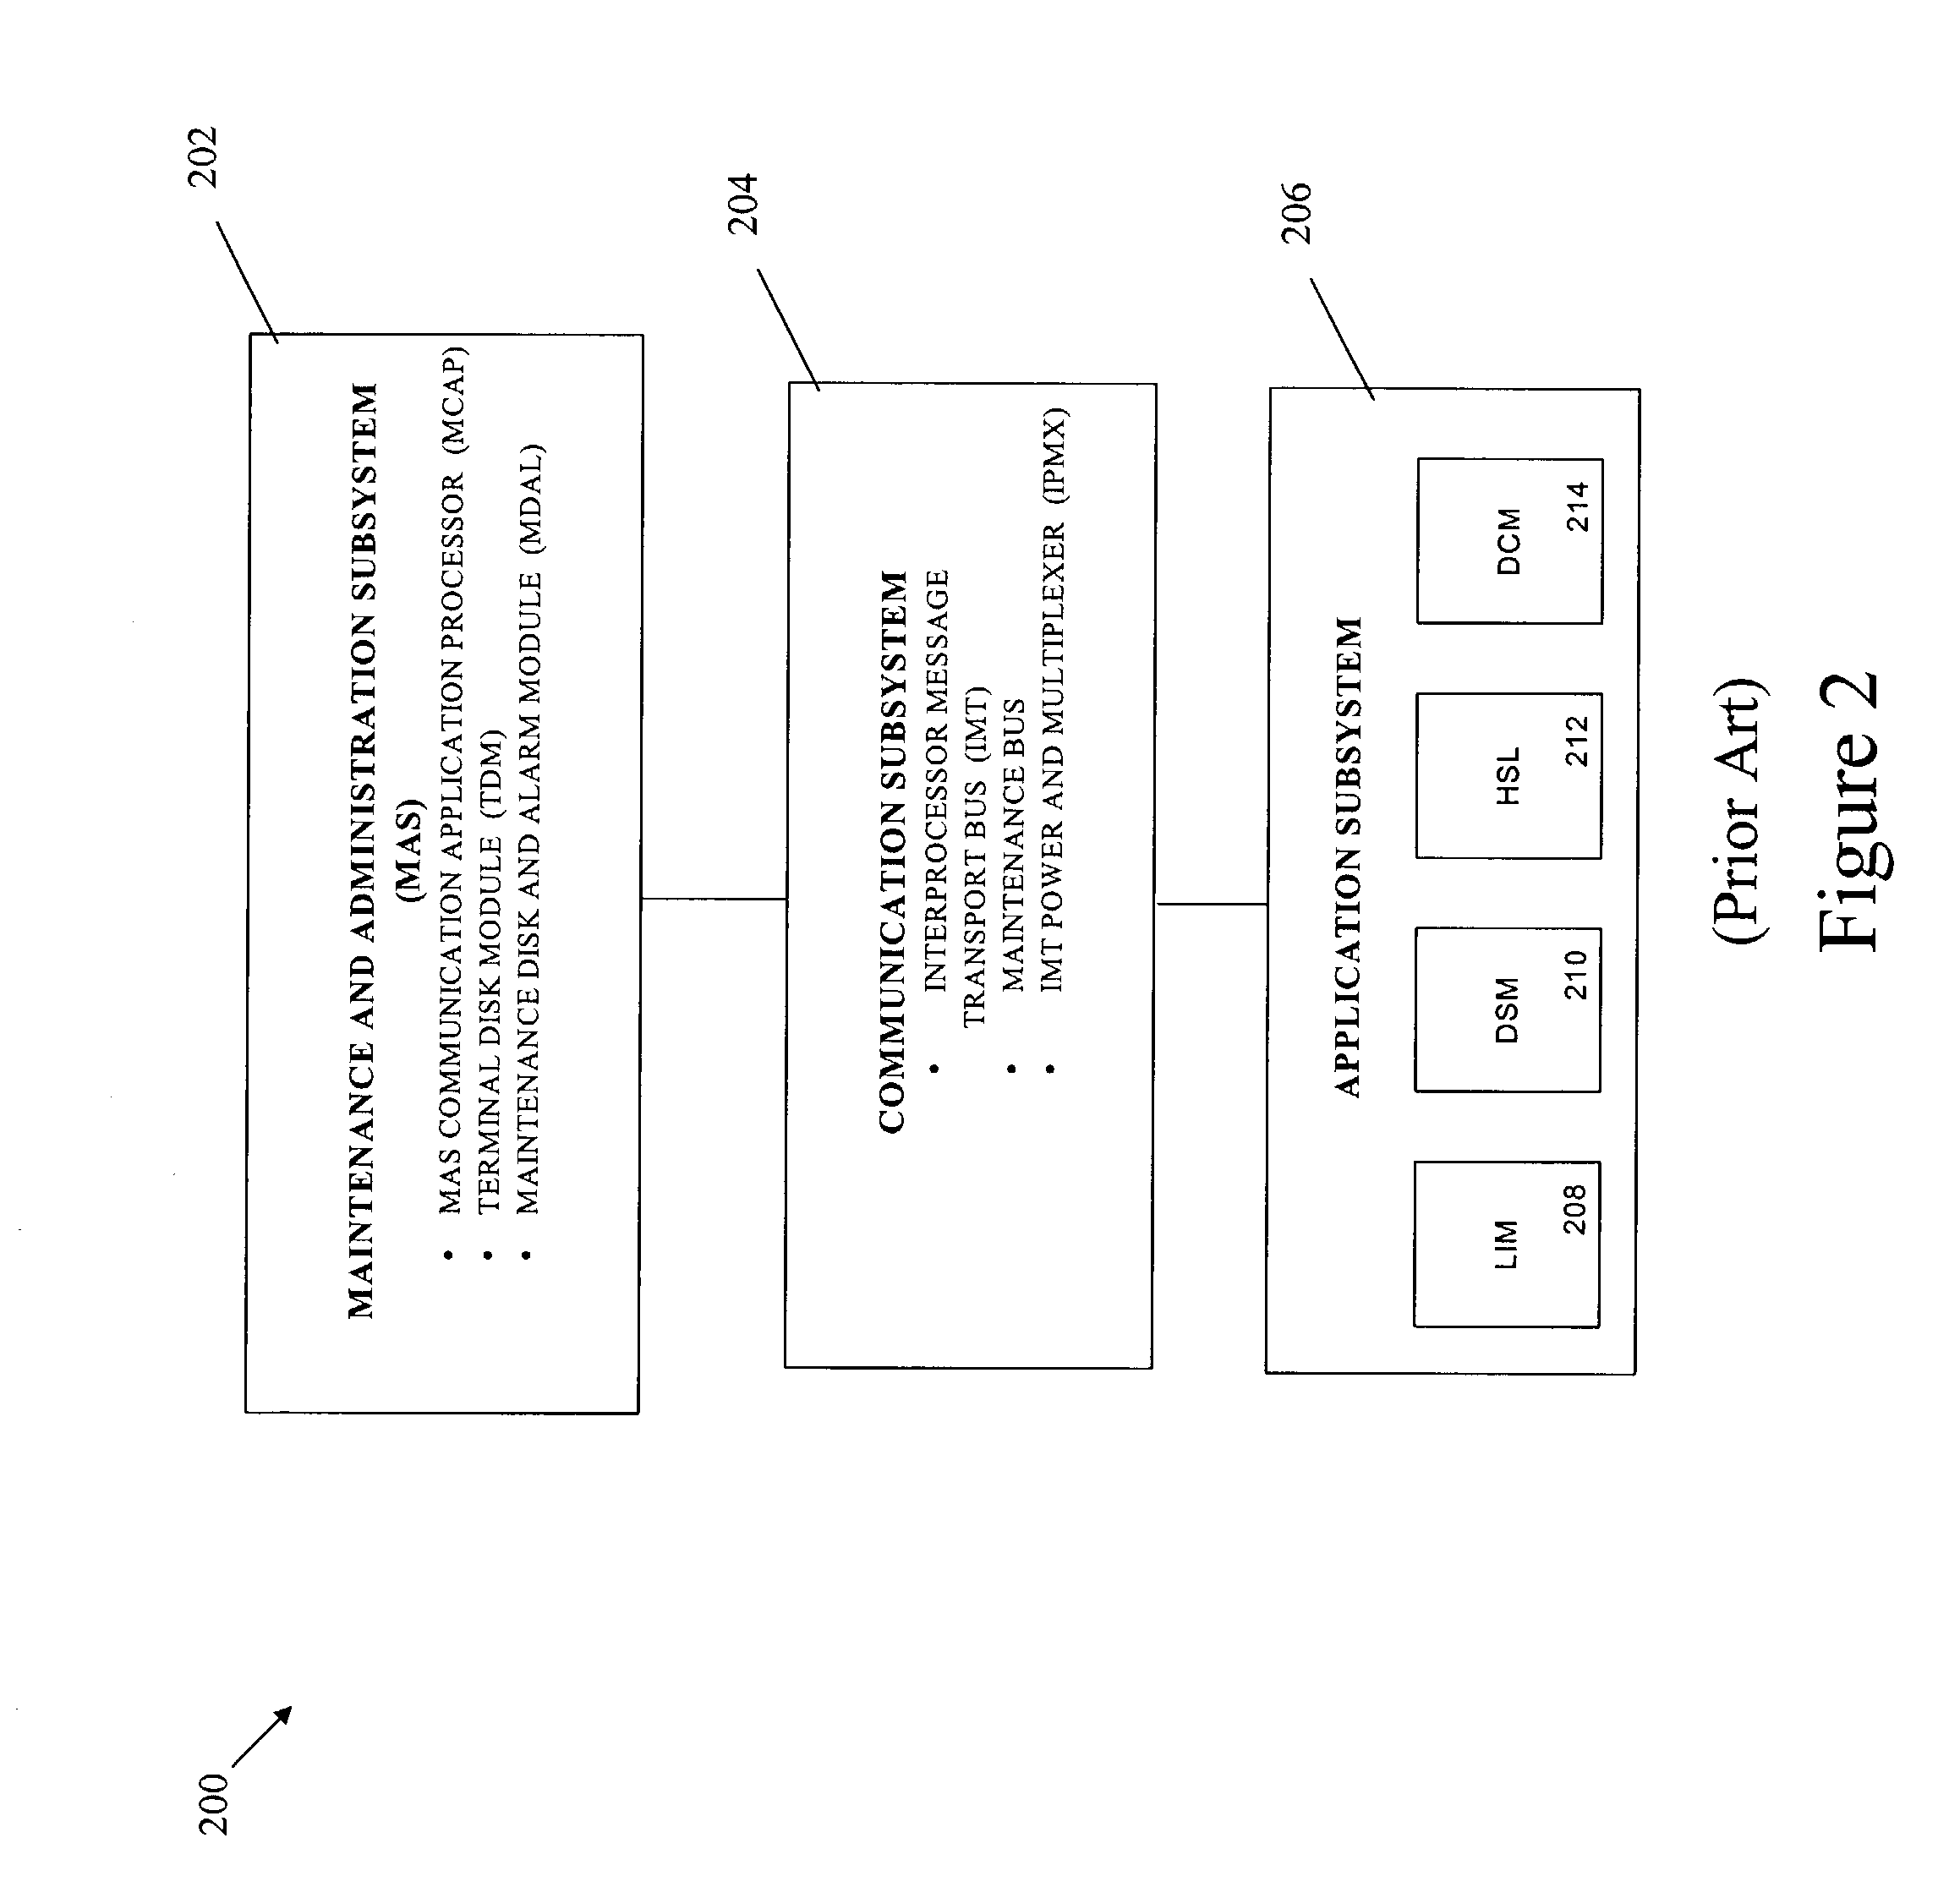 Methods and systems for enhancing network security in a telecommunications signaling network